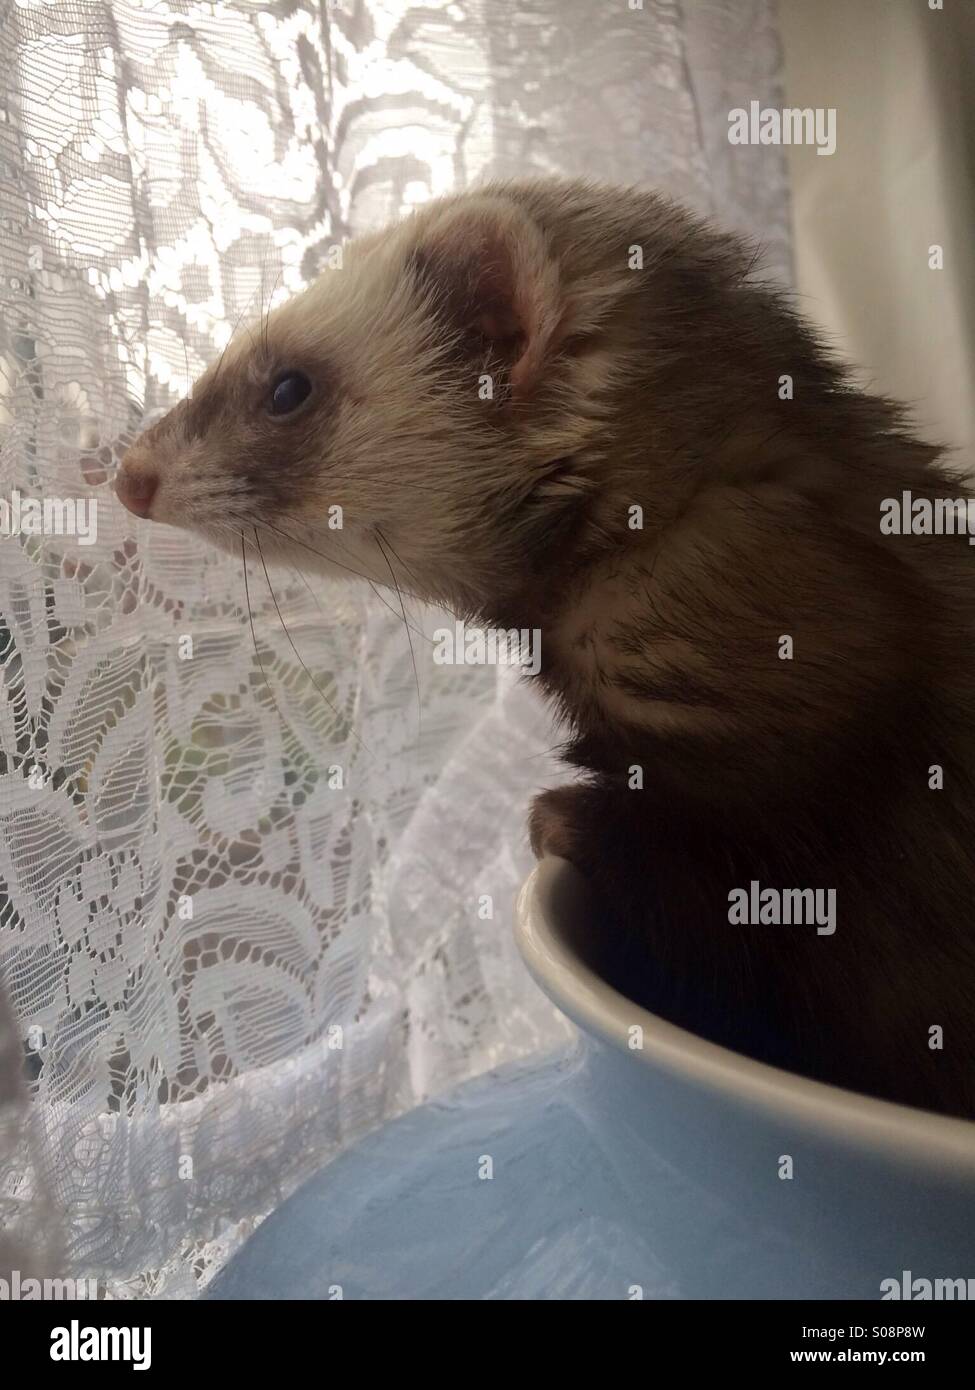 Ferret looking out of window Stock Photo